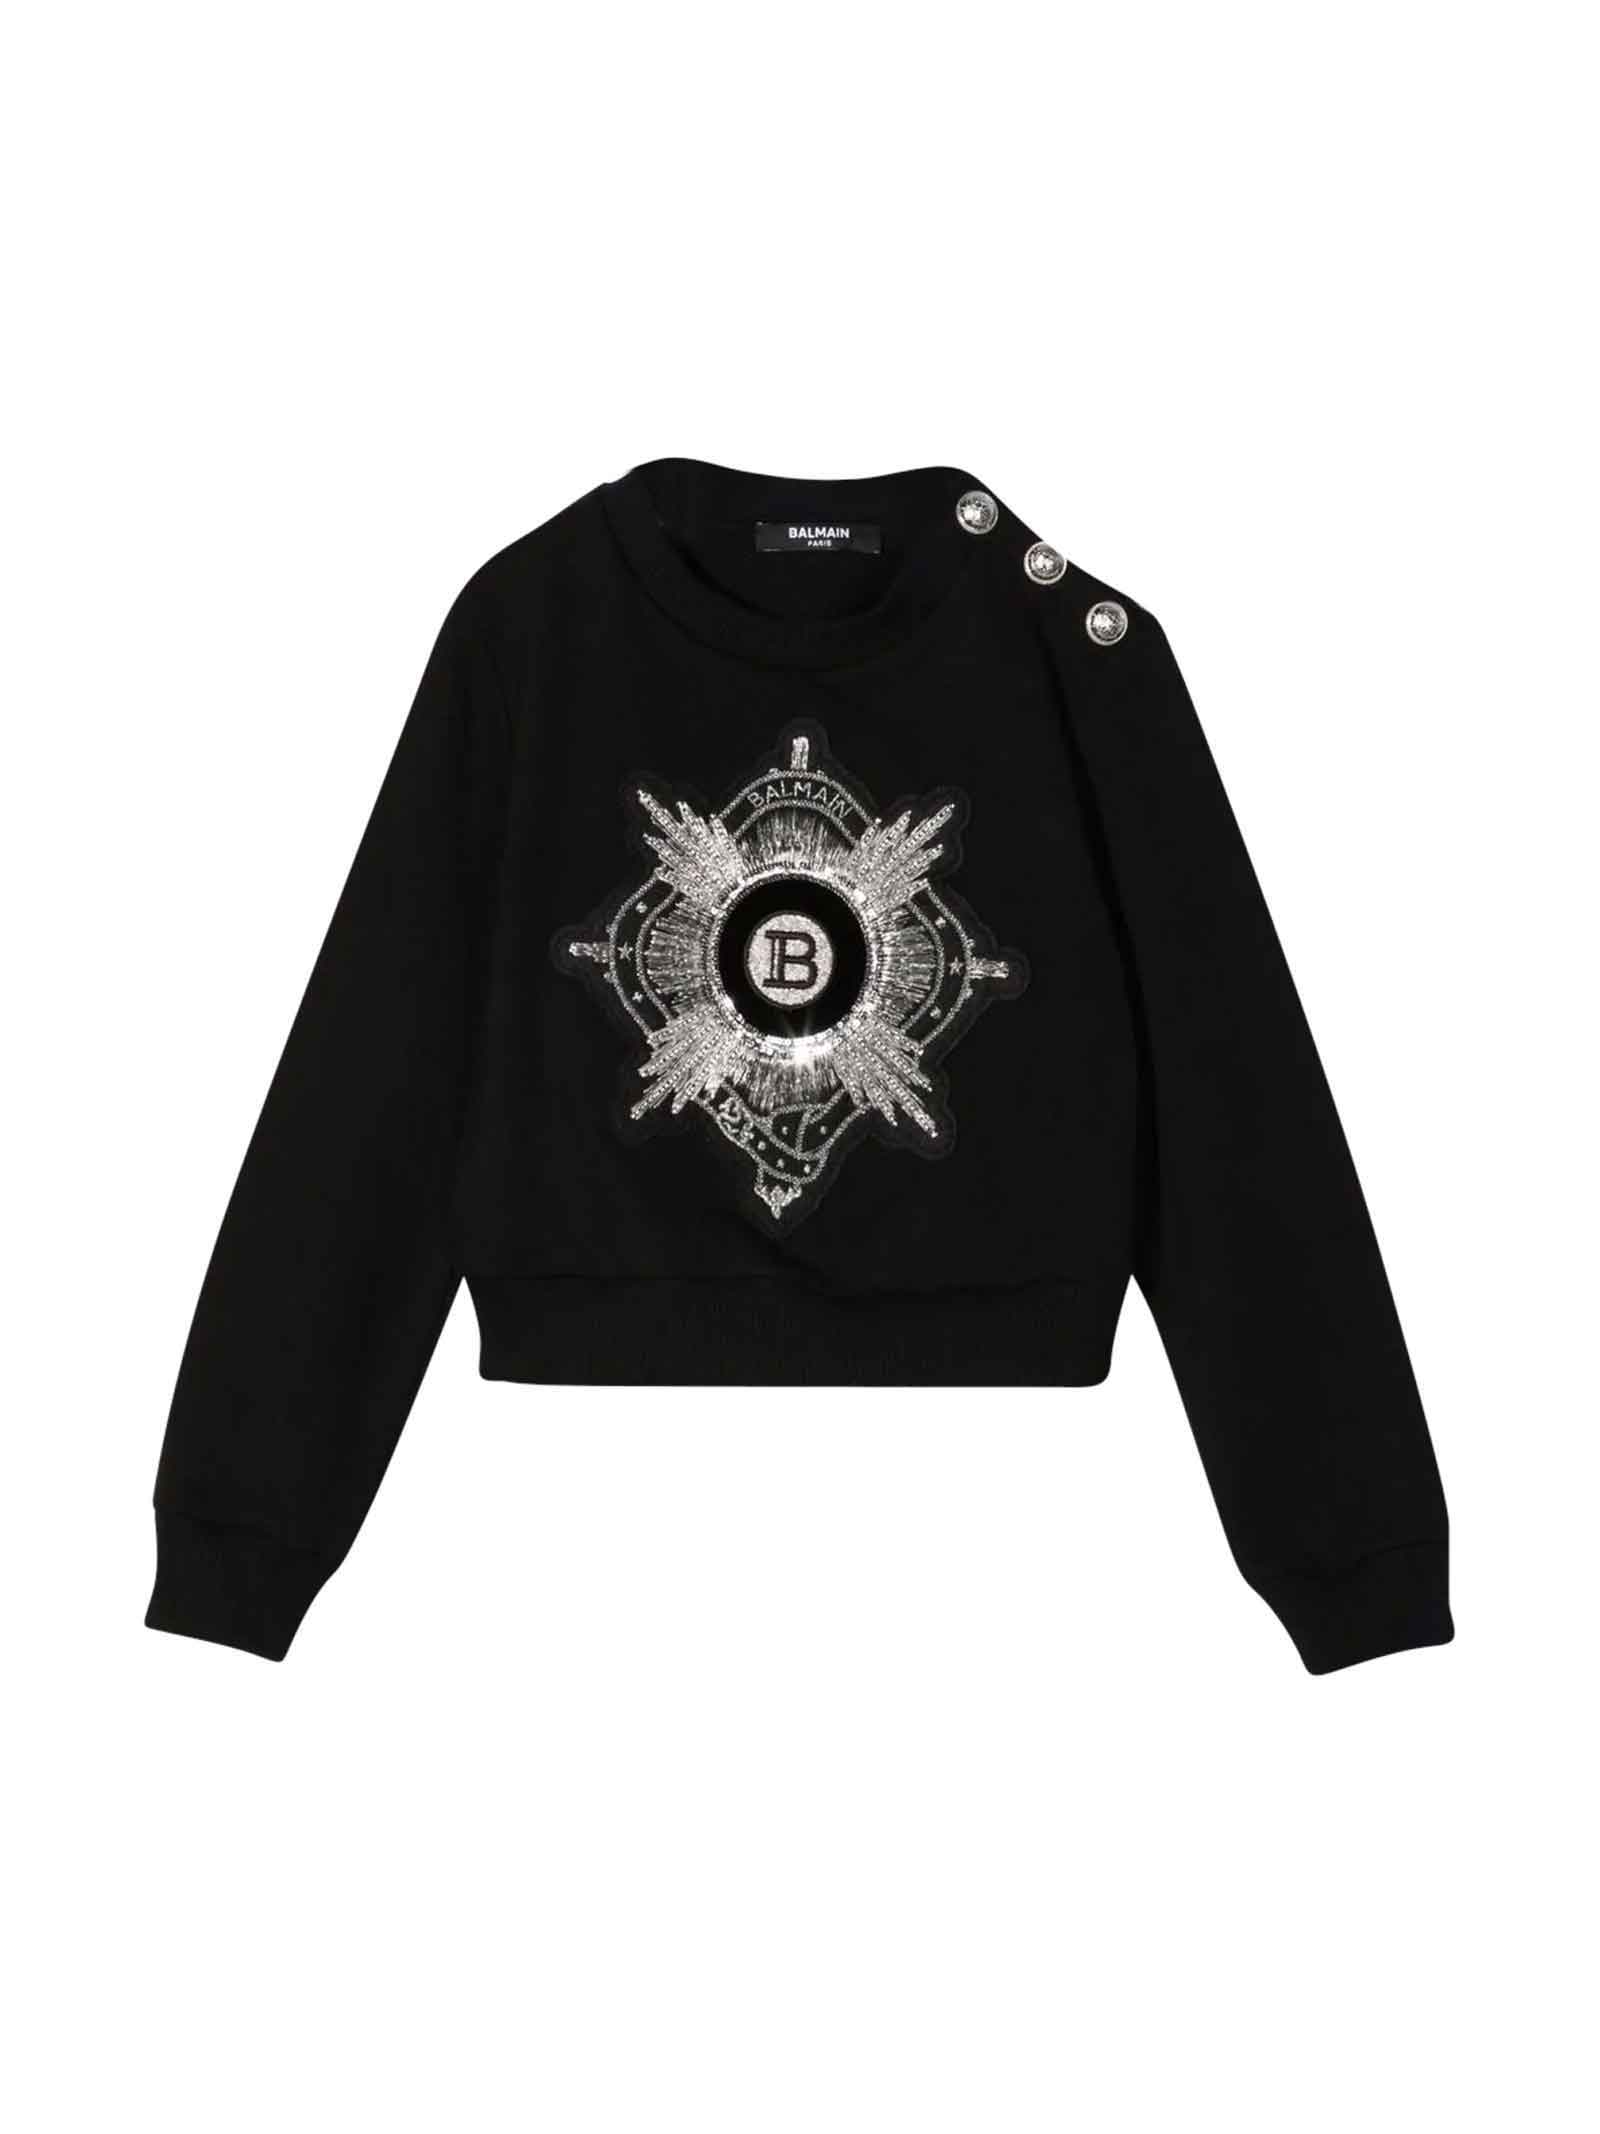 Balmain Black Crop Sweatshirt With Embroidery And Buttons